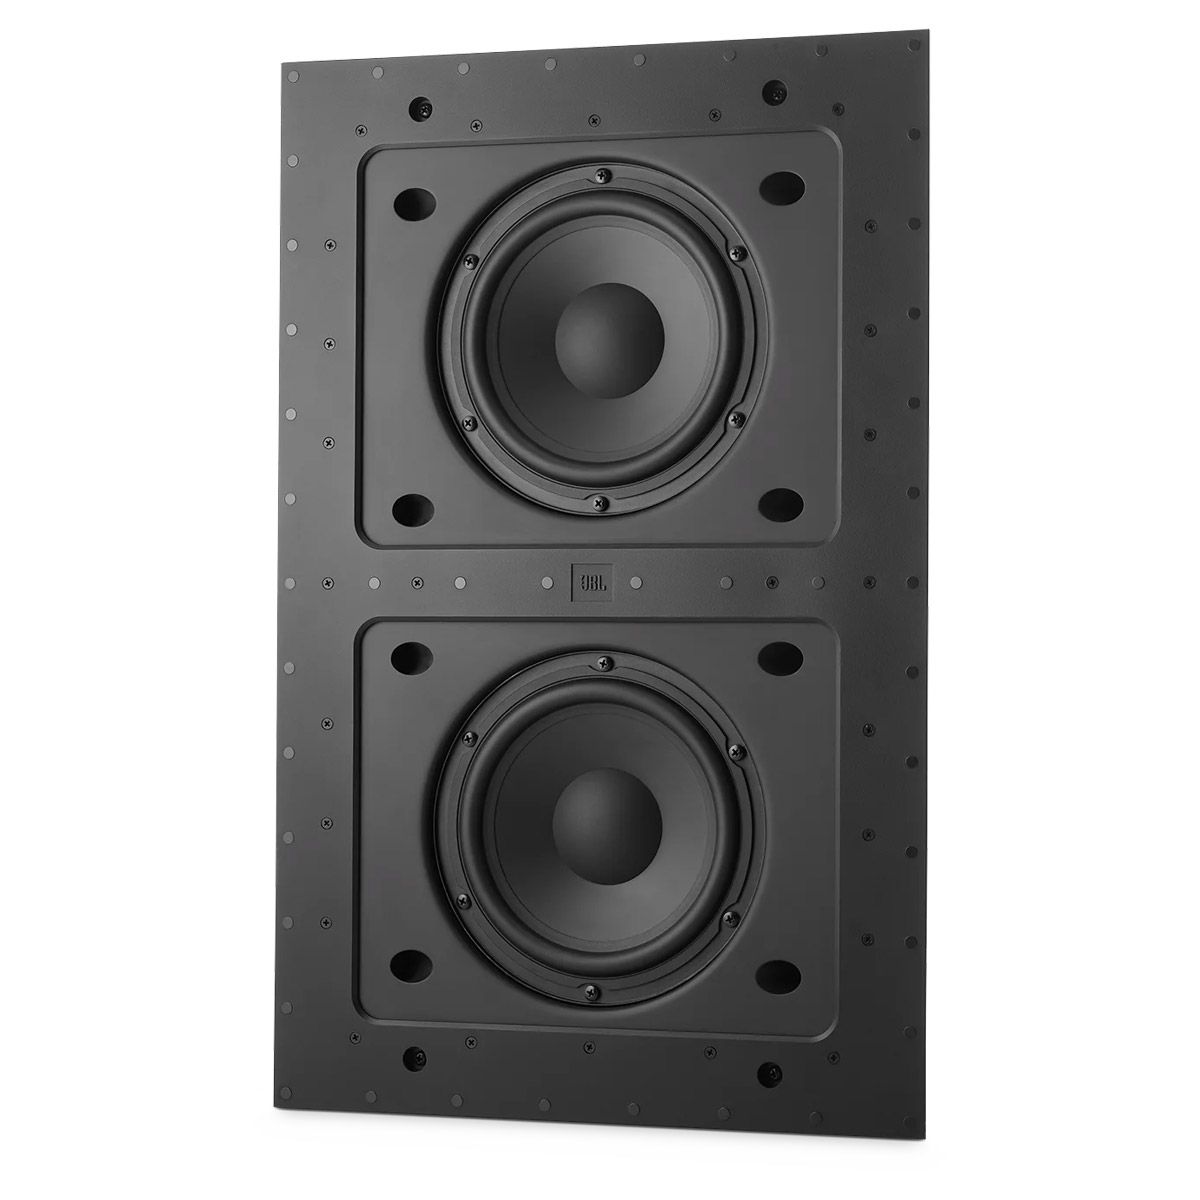 JBL Synthesis SSW-4 Dual 8" In-Wall Subwoofer